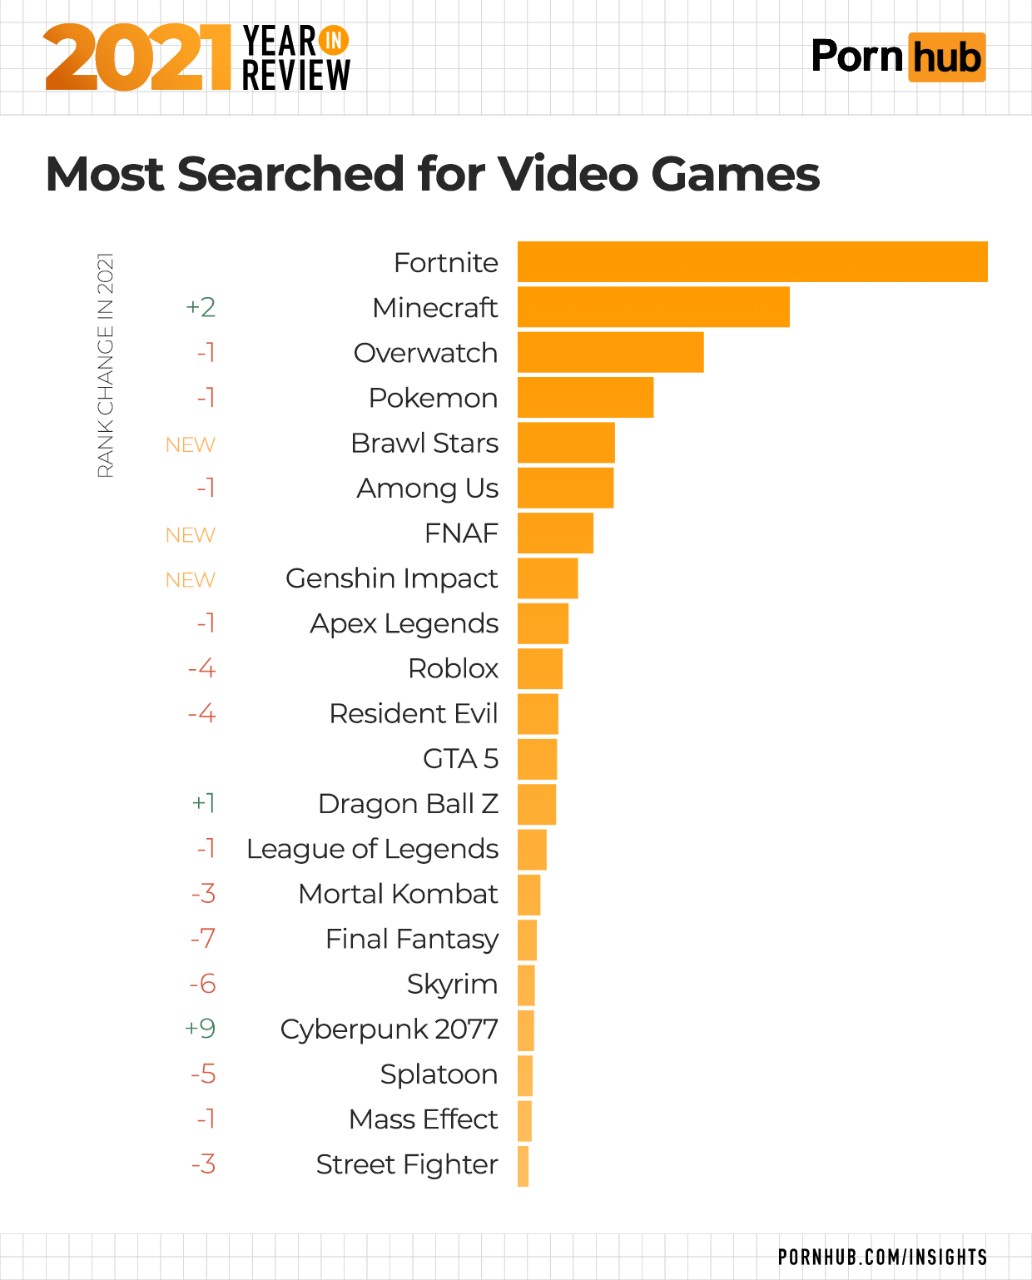 1-pornhub-insights-2021-year-in-review-most-searched-video-games